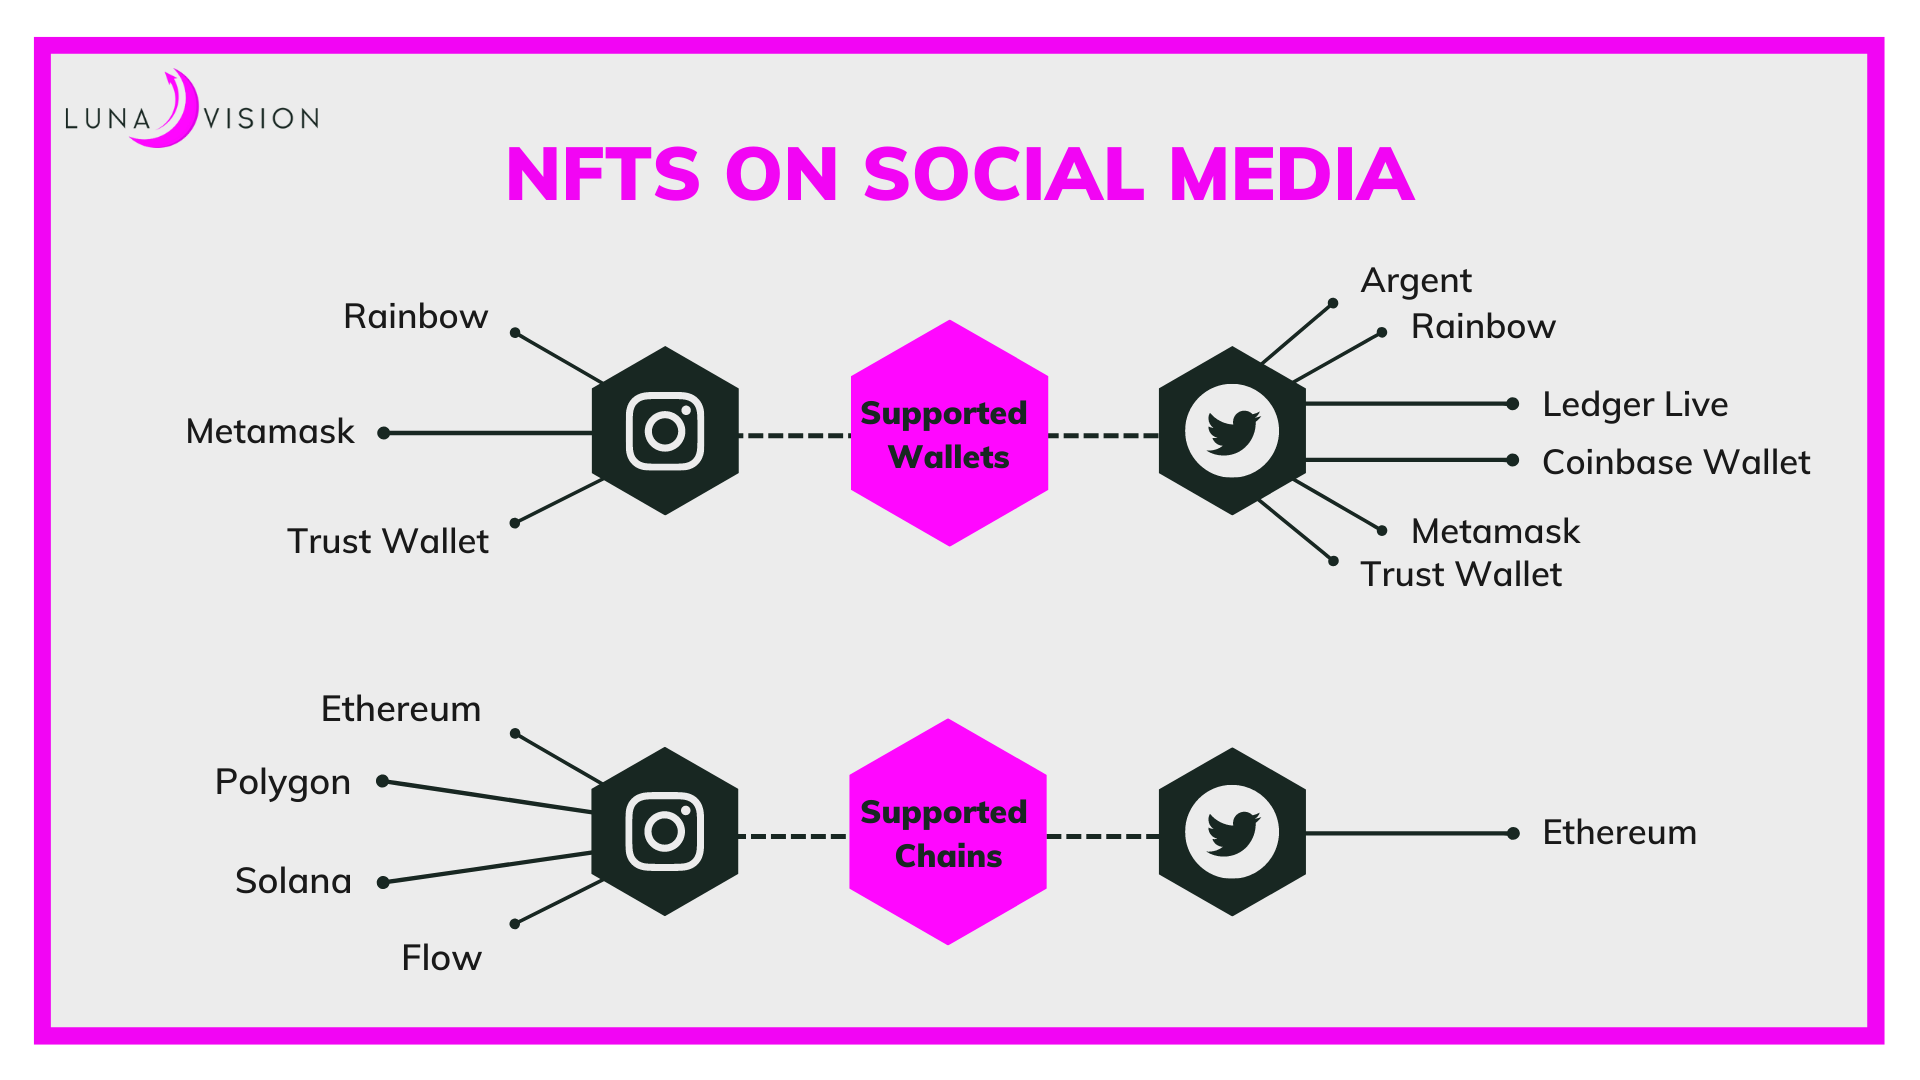 Wallets and blockchains supported by Instagram and Twitter for NFT integration